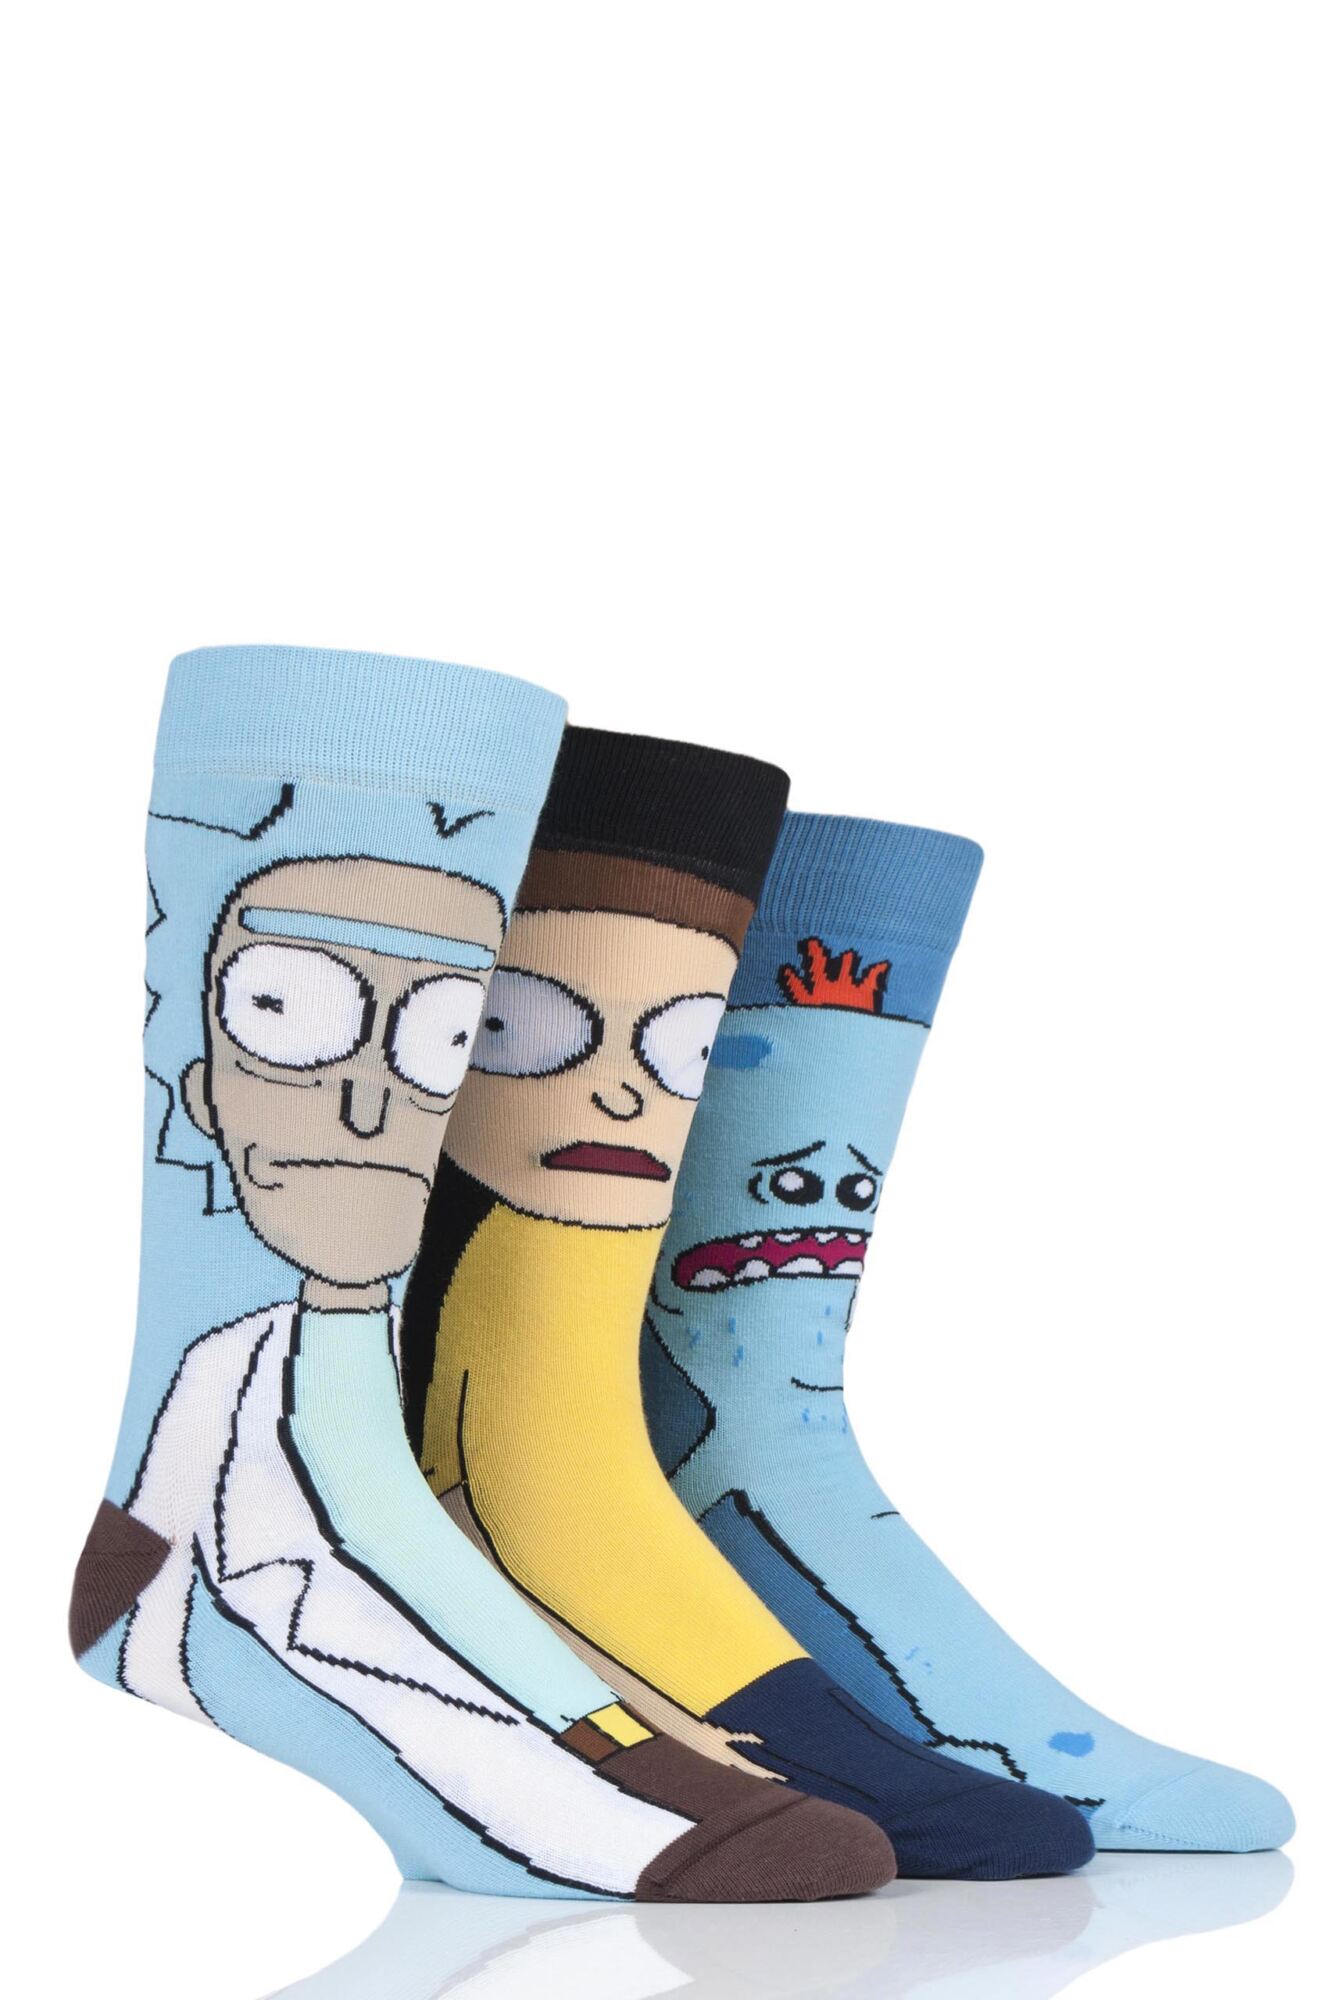 3 Pair Rick and Morty Cotton Socks Men's - Film & TV Characters